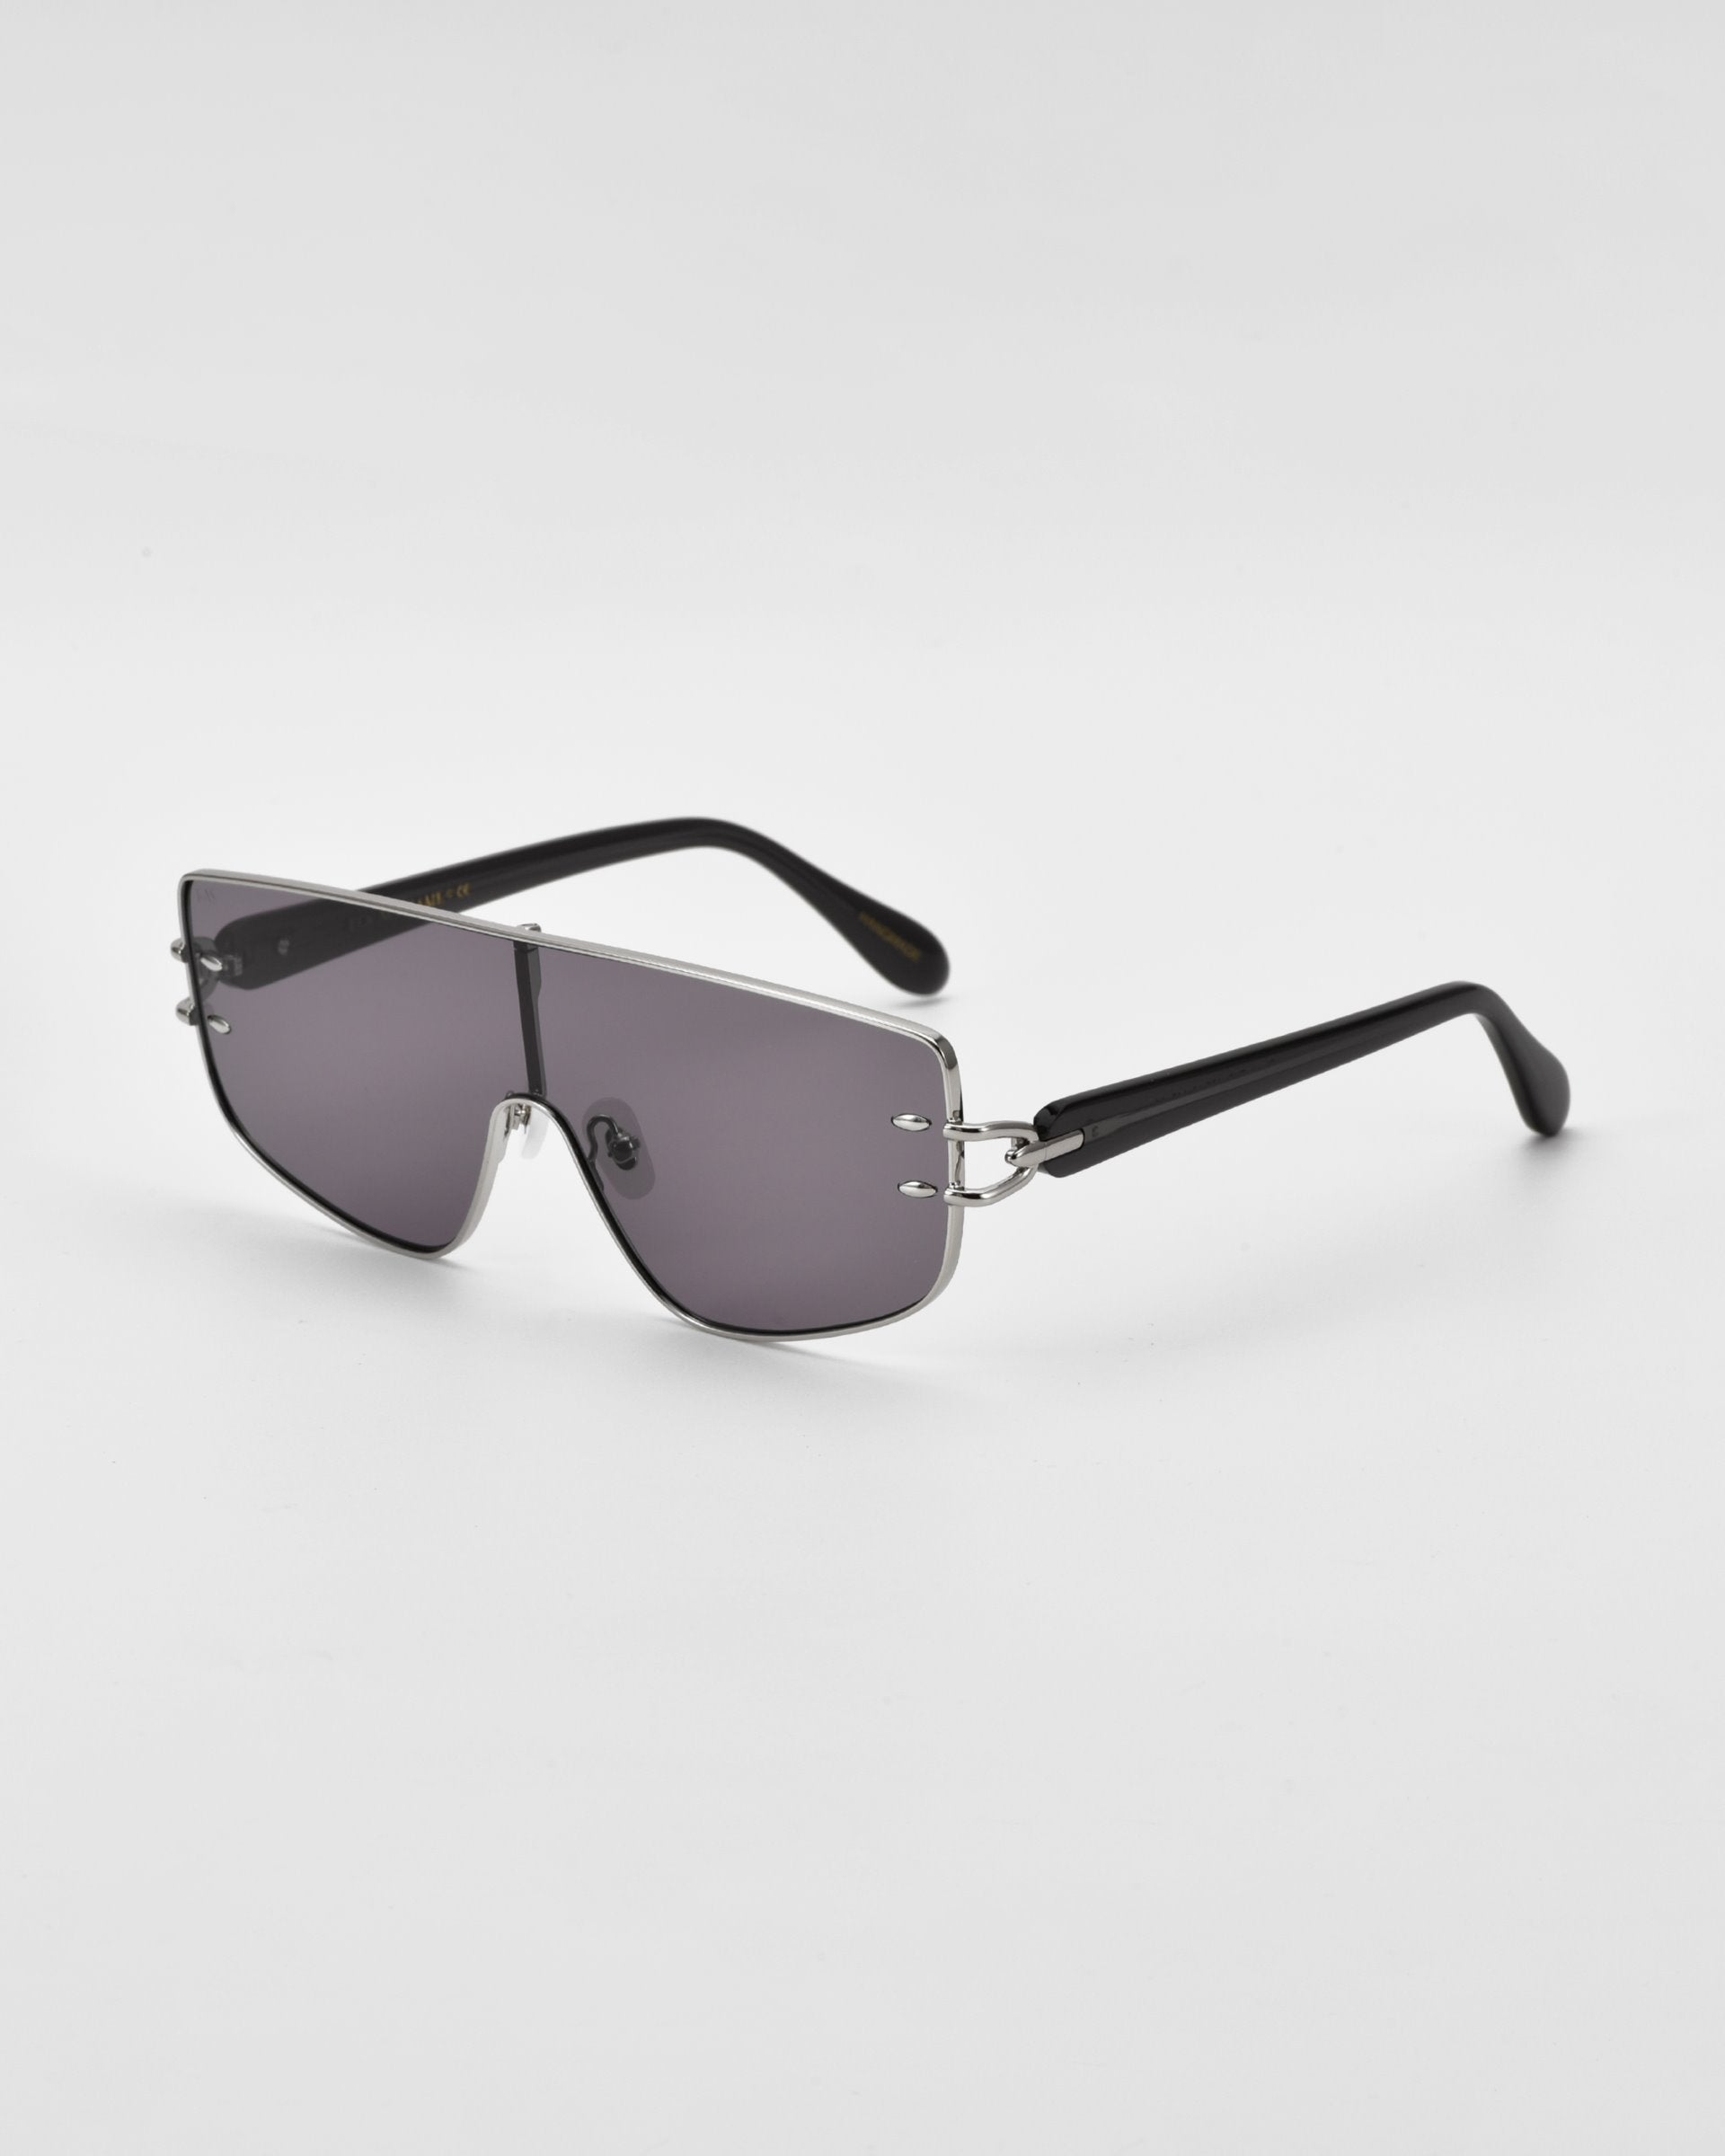 A pair of modern, angular For Art&#39;s Sake® Flare sunglasses with a silver metal frame, dark tinted rectangular lenses, and black arms. The futuristic design features a single, seamless lens spanning both eyes. Luxury eyewear set against a plain white background.